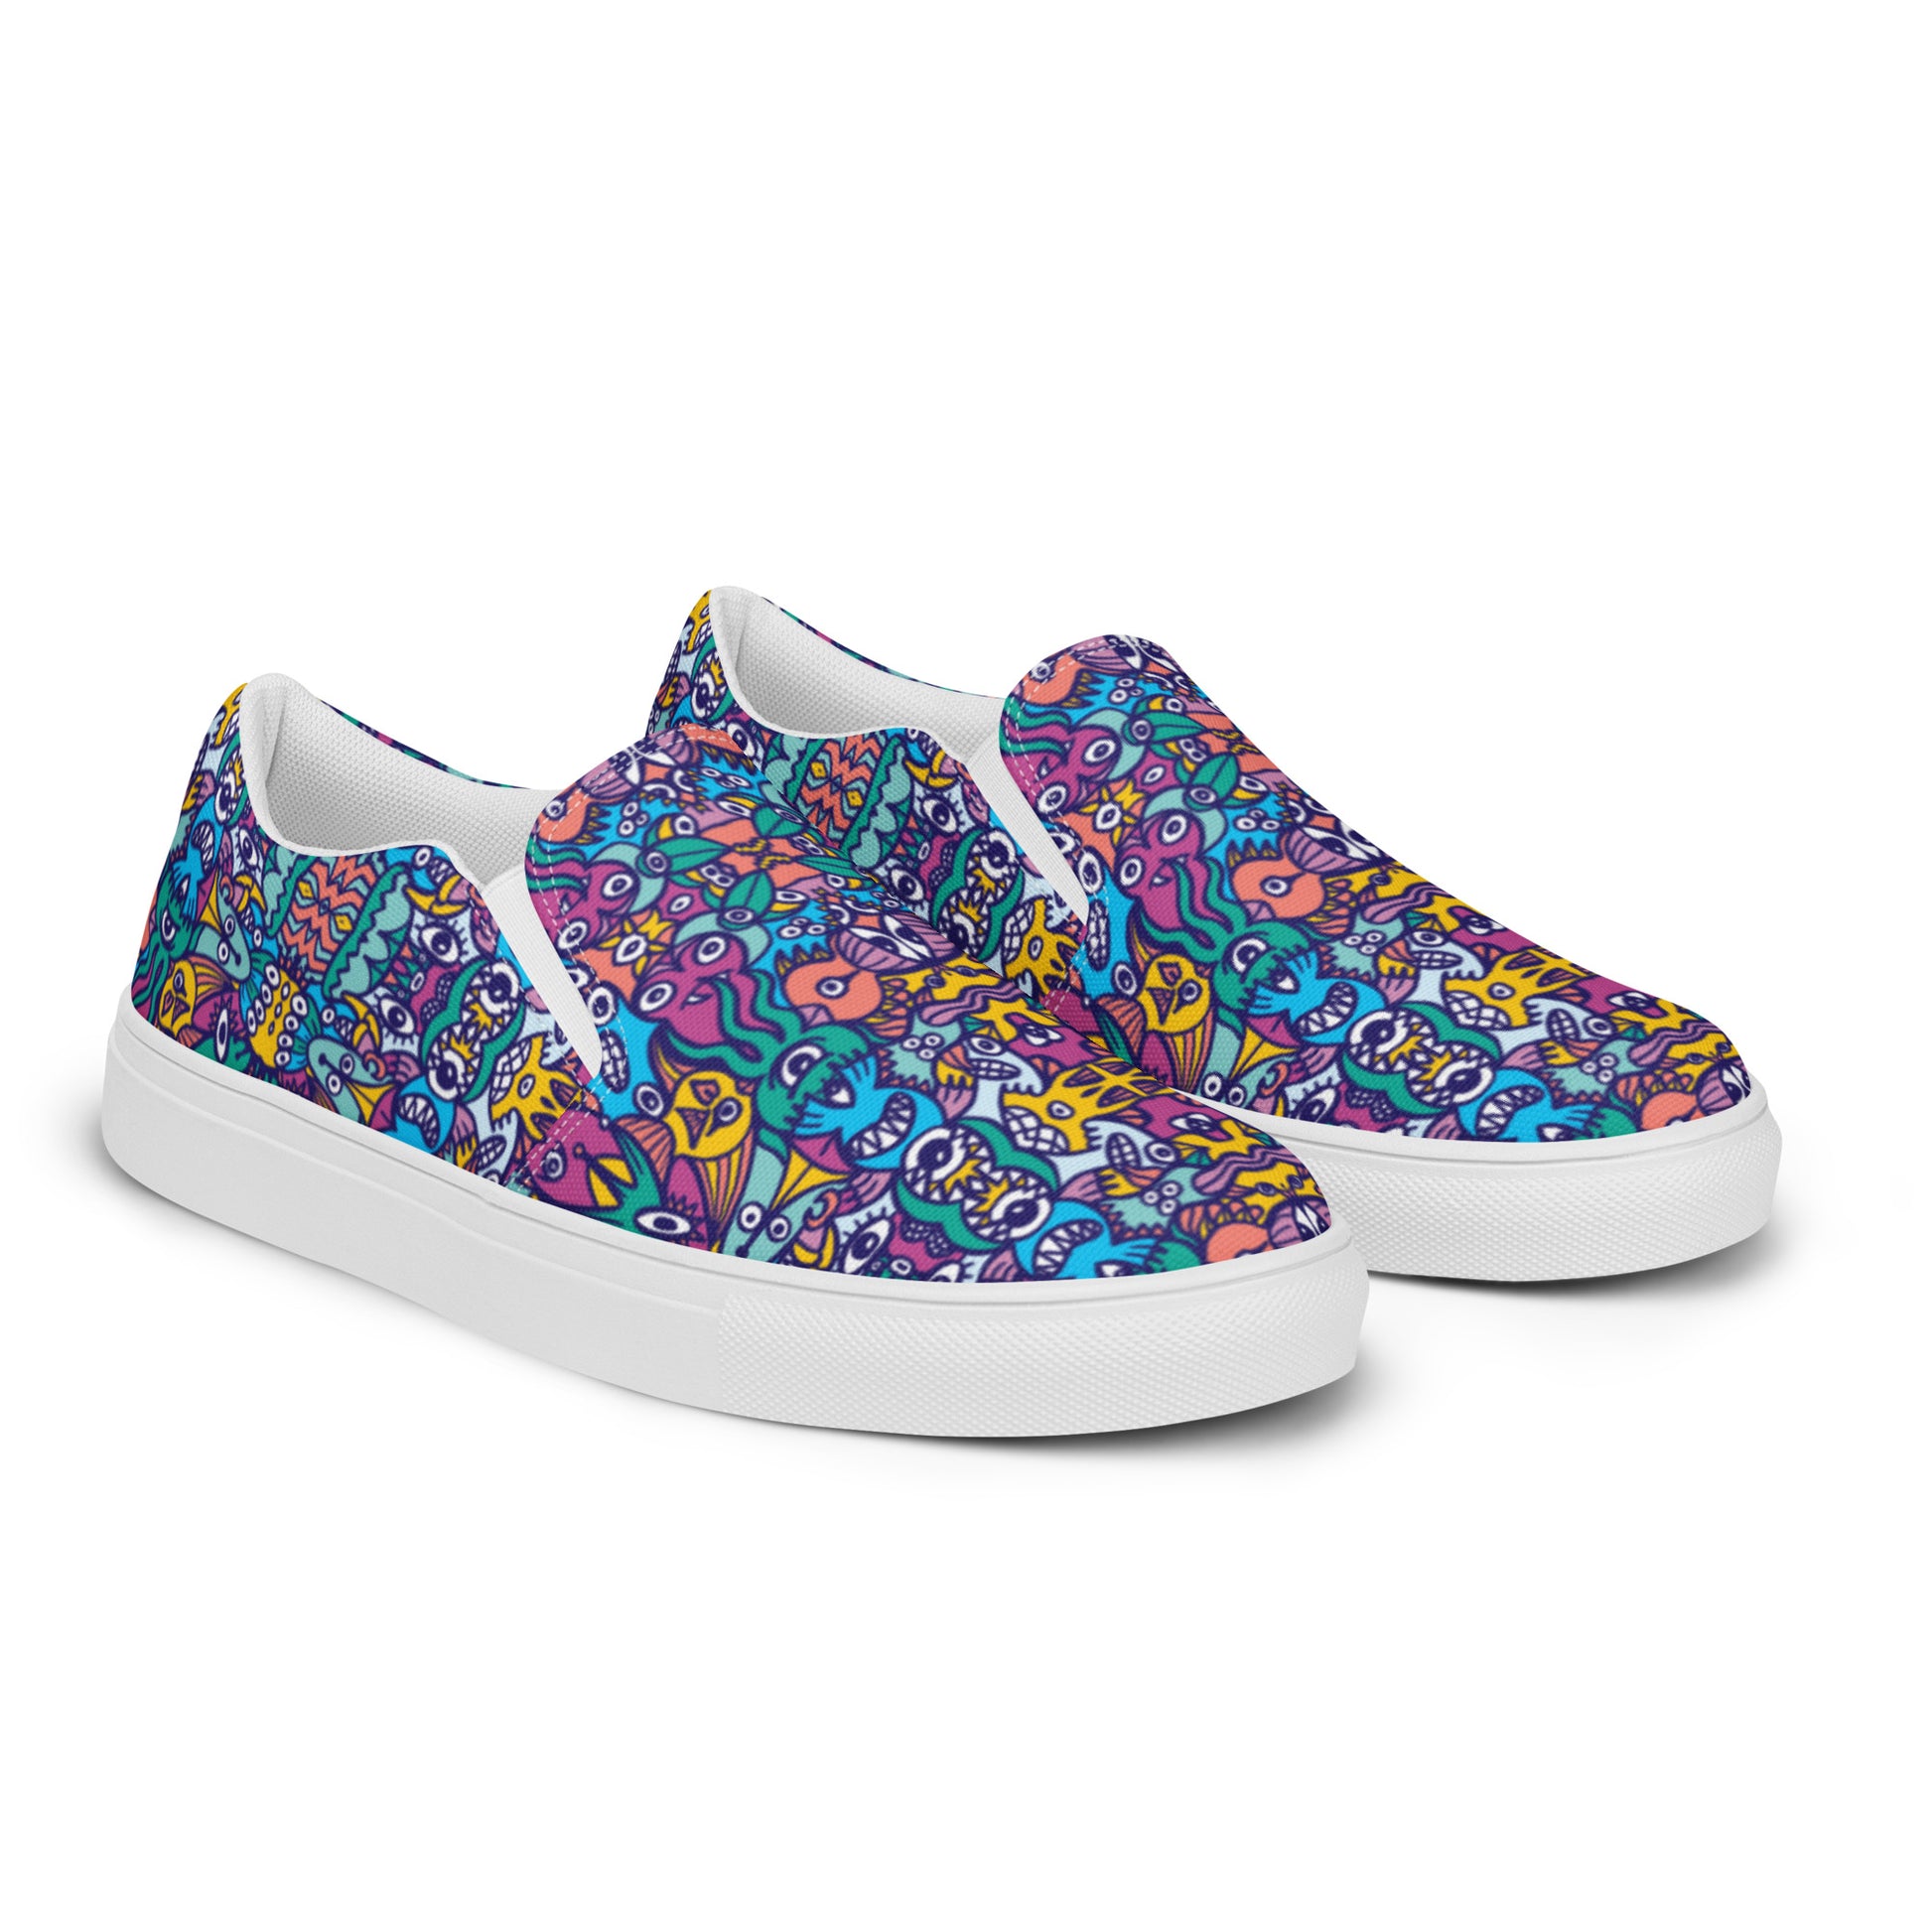 Whimsical design featuring multicolor critters from another world Women’s slip-on canvas shoes. Overview